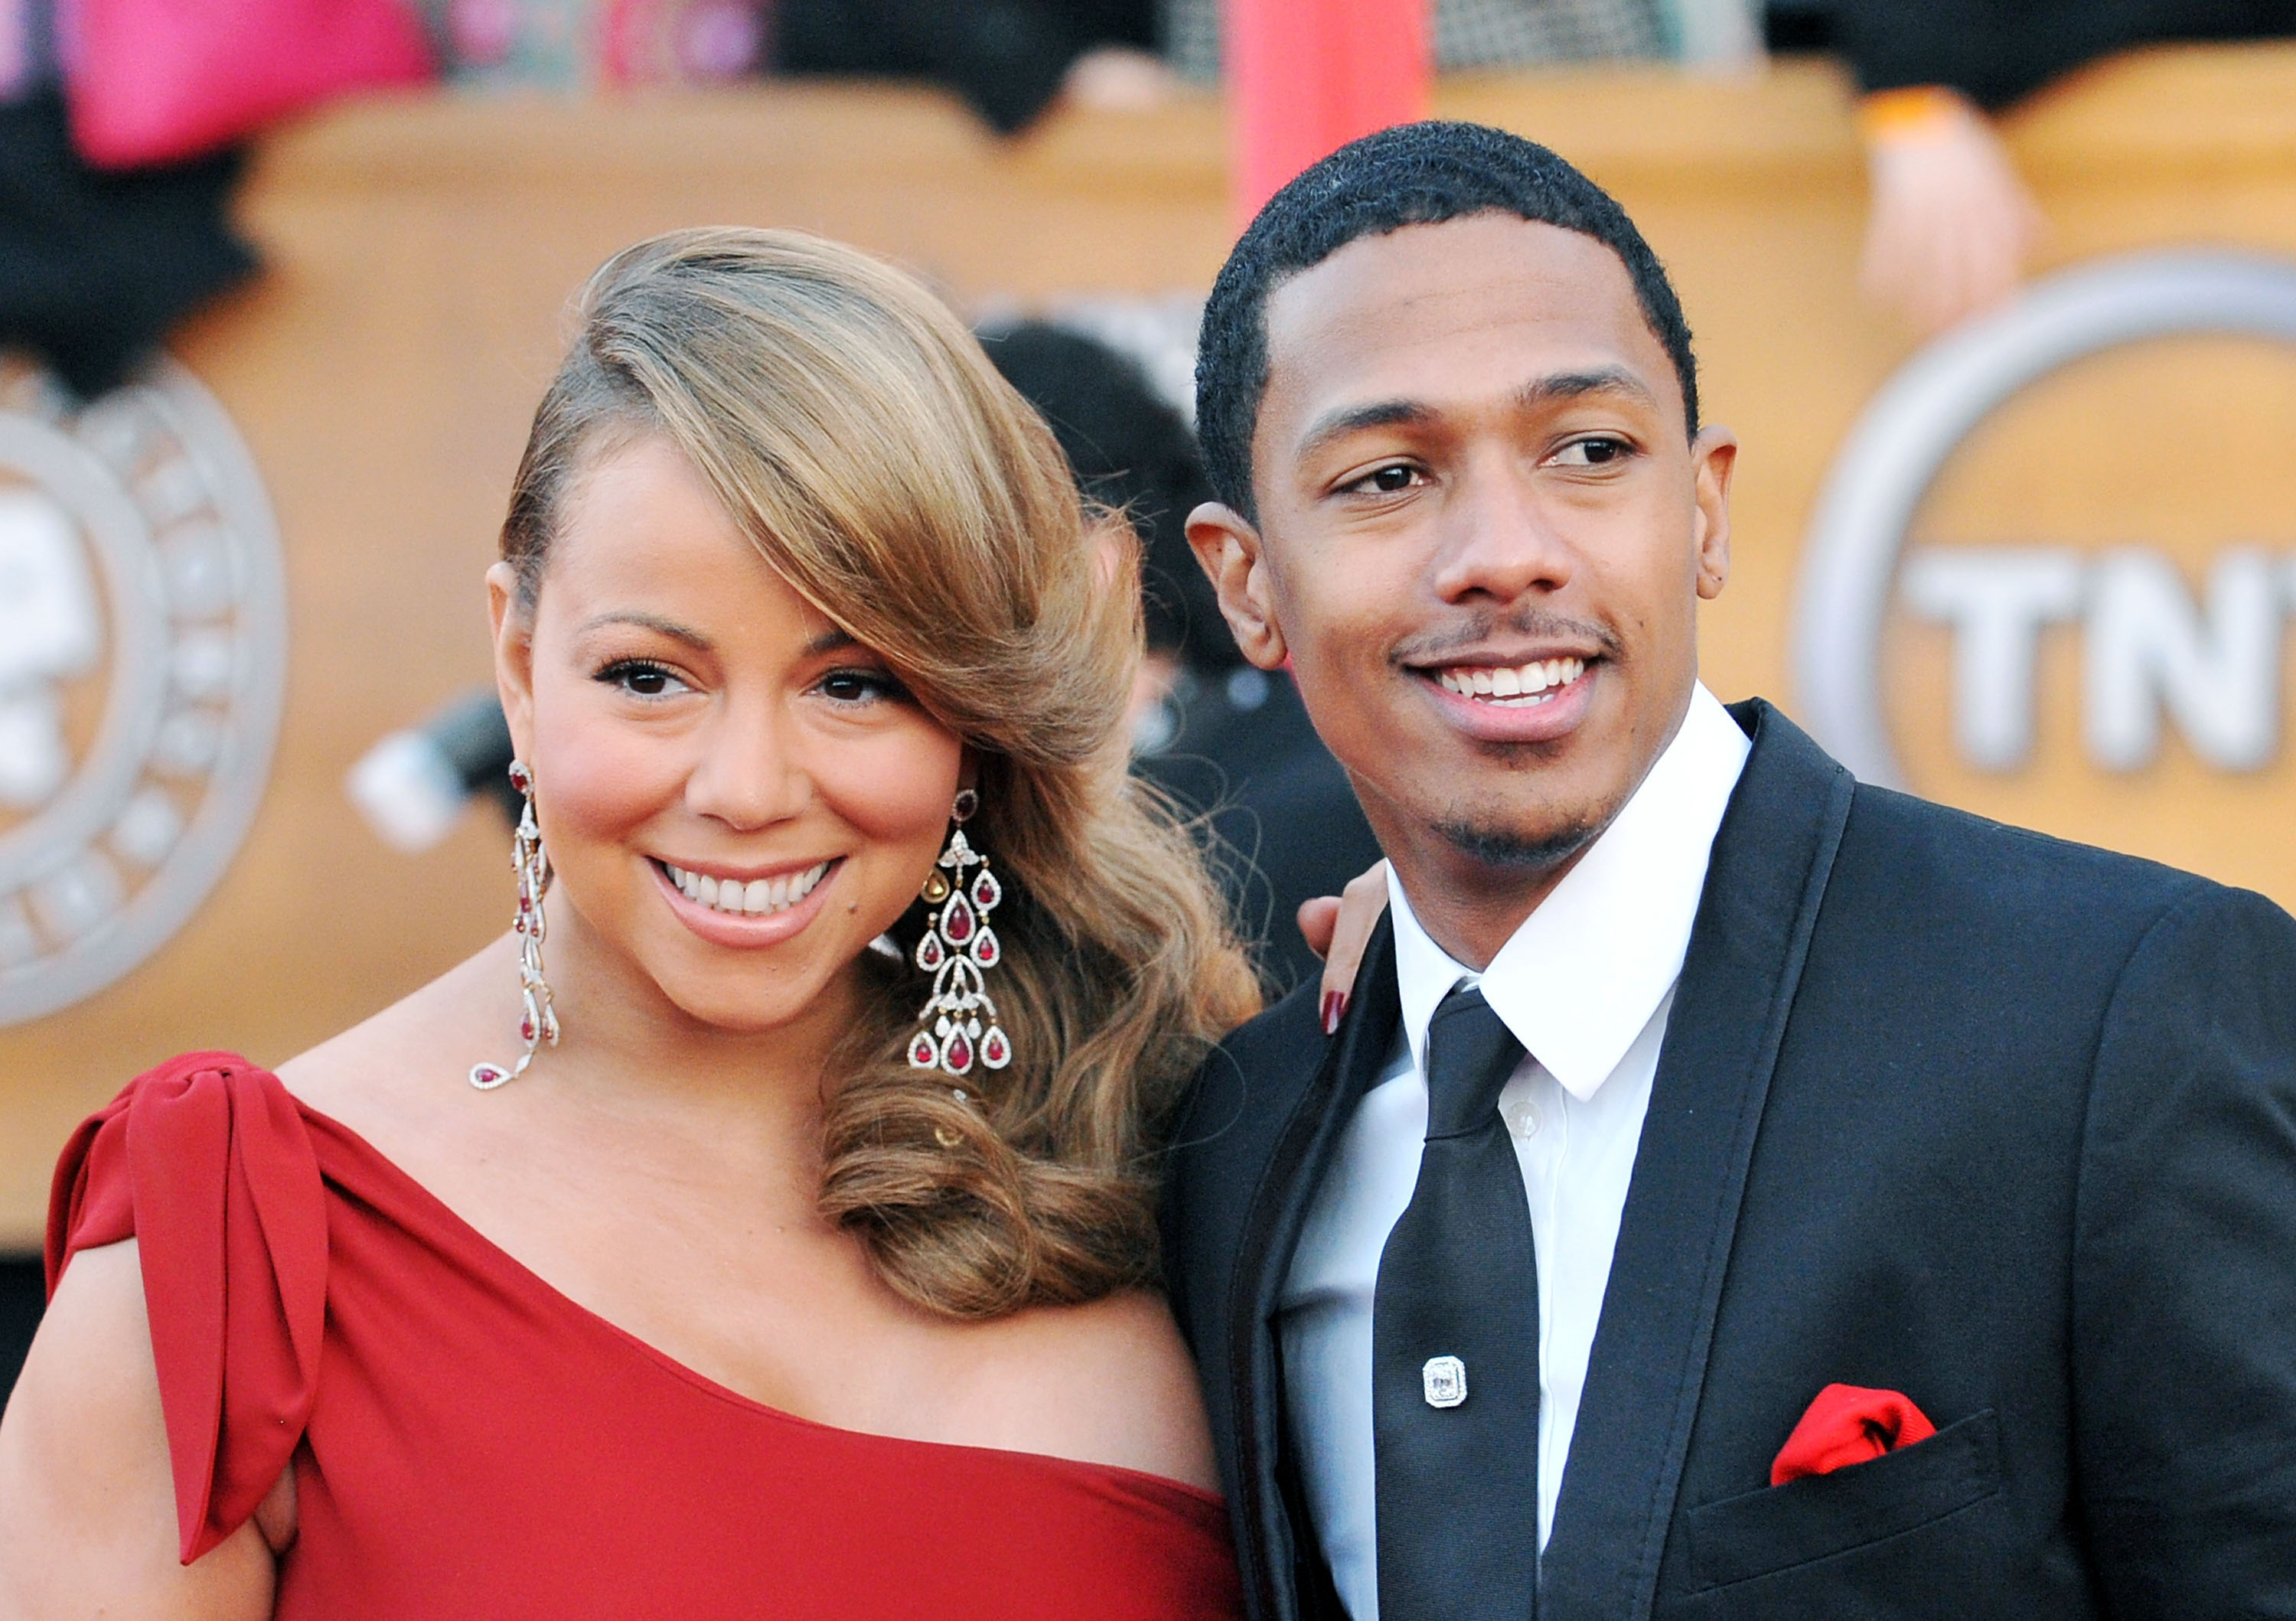 Mariah Carey and Nick Cannon at the 16th Annual Screen Actors Guild Awards on January 23, 2010, in Los Angeles, California. | Source: Getty Images